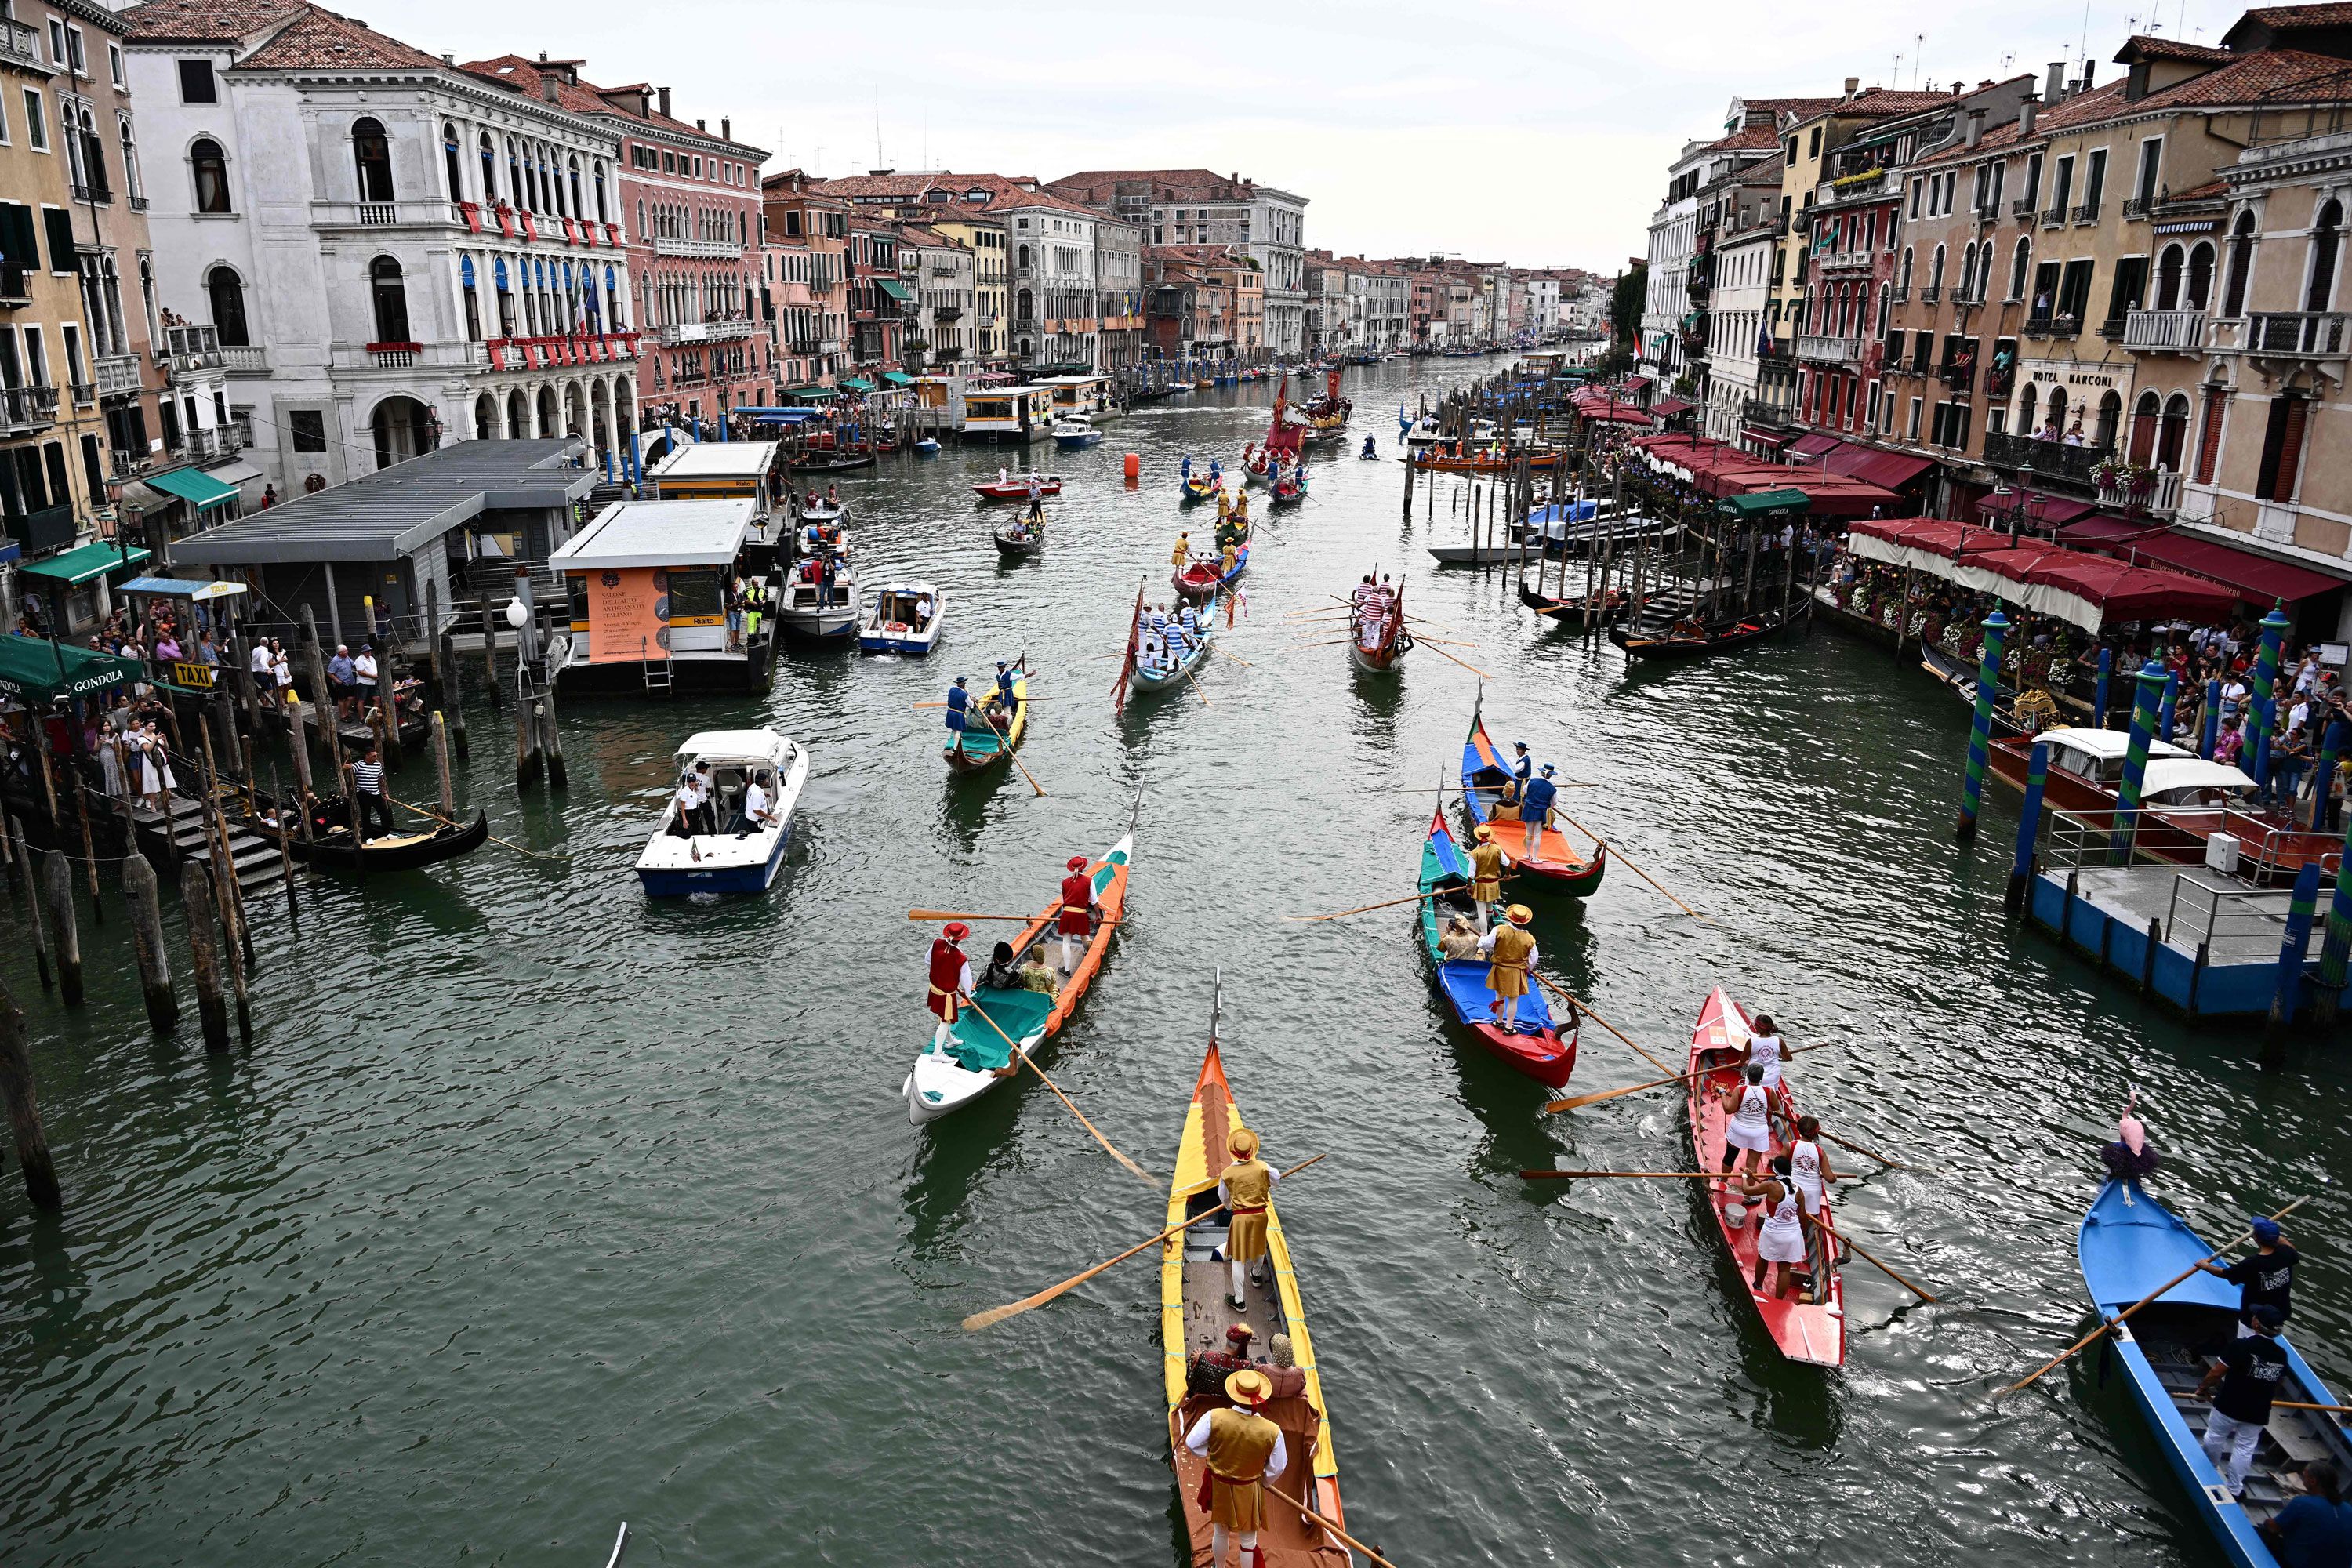 TOPSHOT - Rowers take part in the annual gondolas and boats Historical Regatta (Regata Storica) on the Grand Canal in Venice on September 3, 2023. (Photo by GABRIEL BOUYS / AFP) (Photo by GABRIEL BOUYS/AFP via Getty Images)